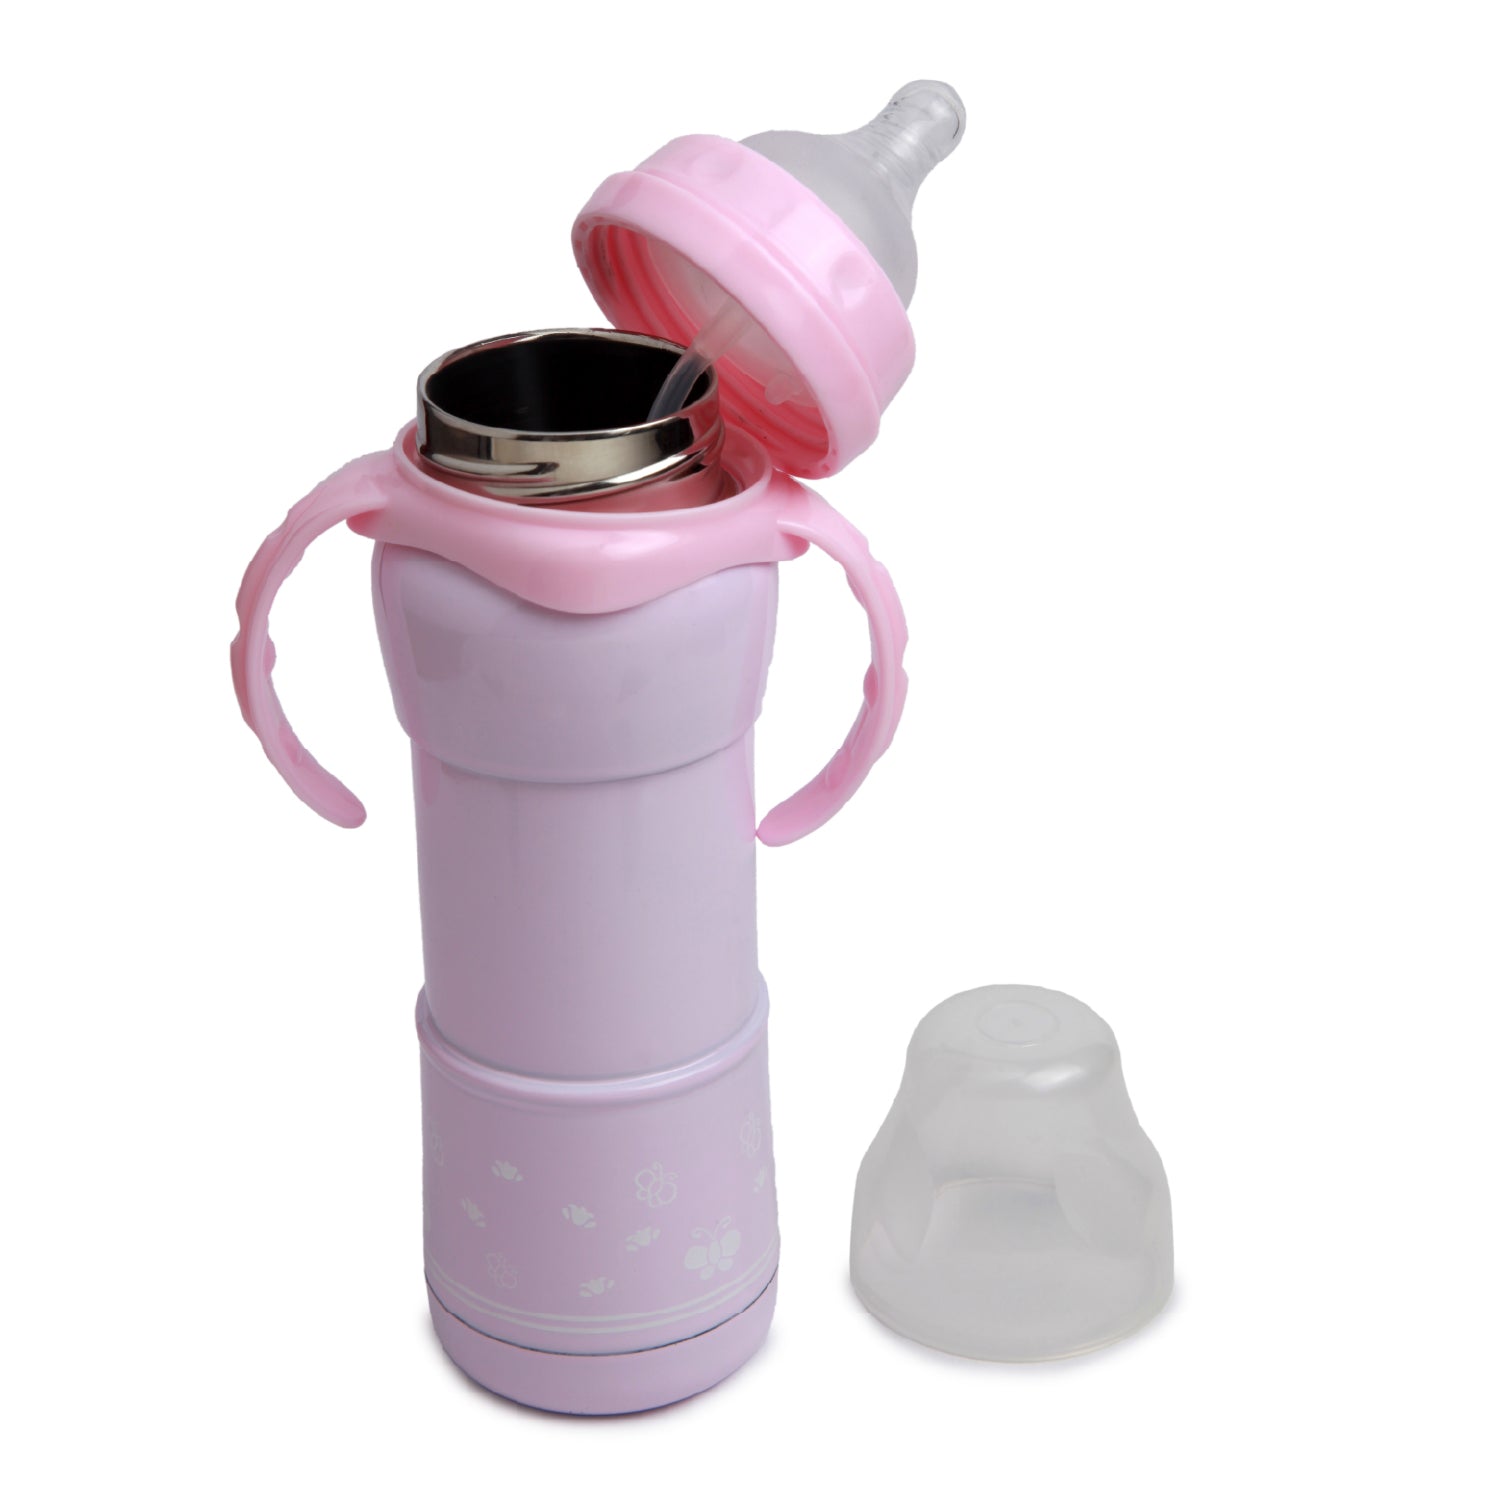 Hold Me With 2 Hands 240 ml Feeding Bottle Pink - Baby Moo